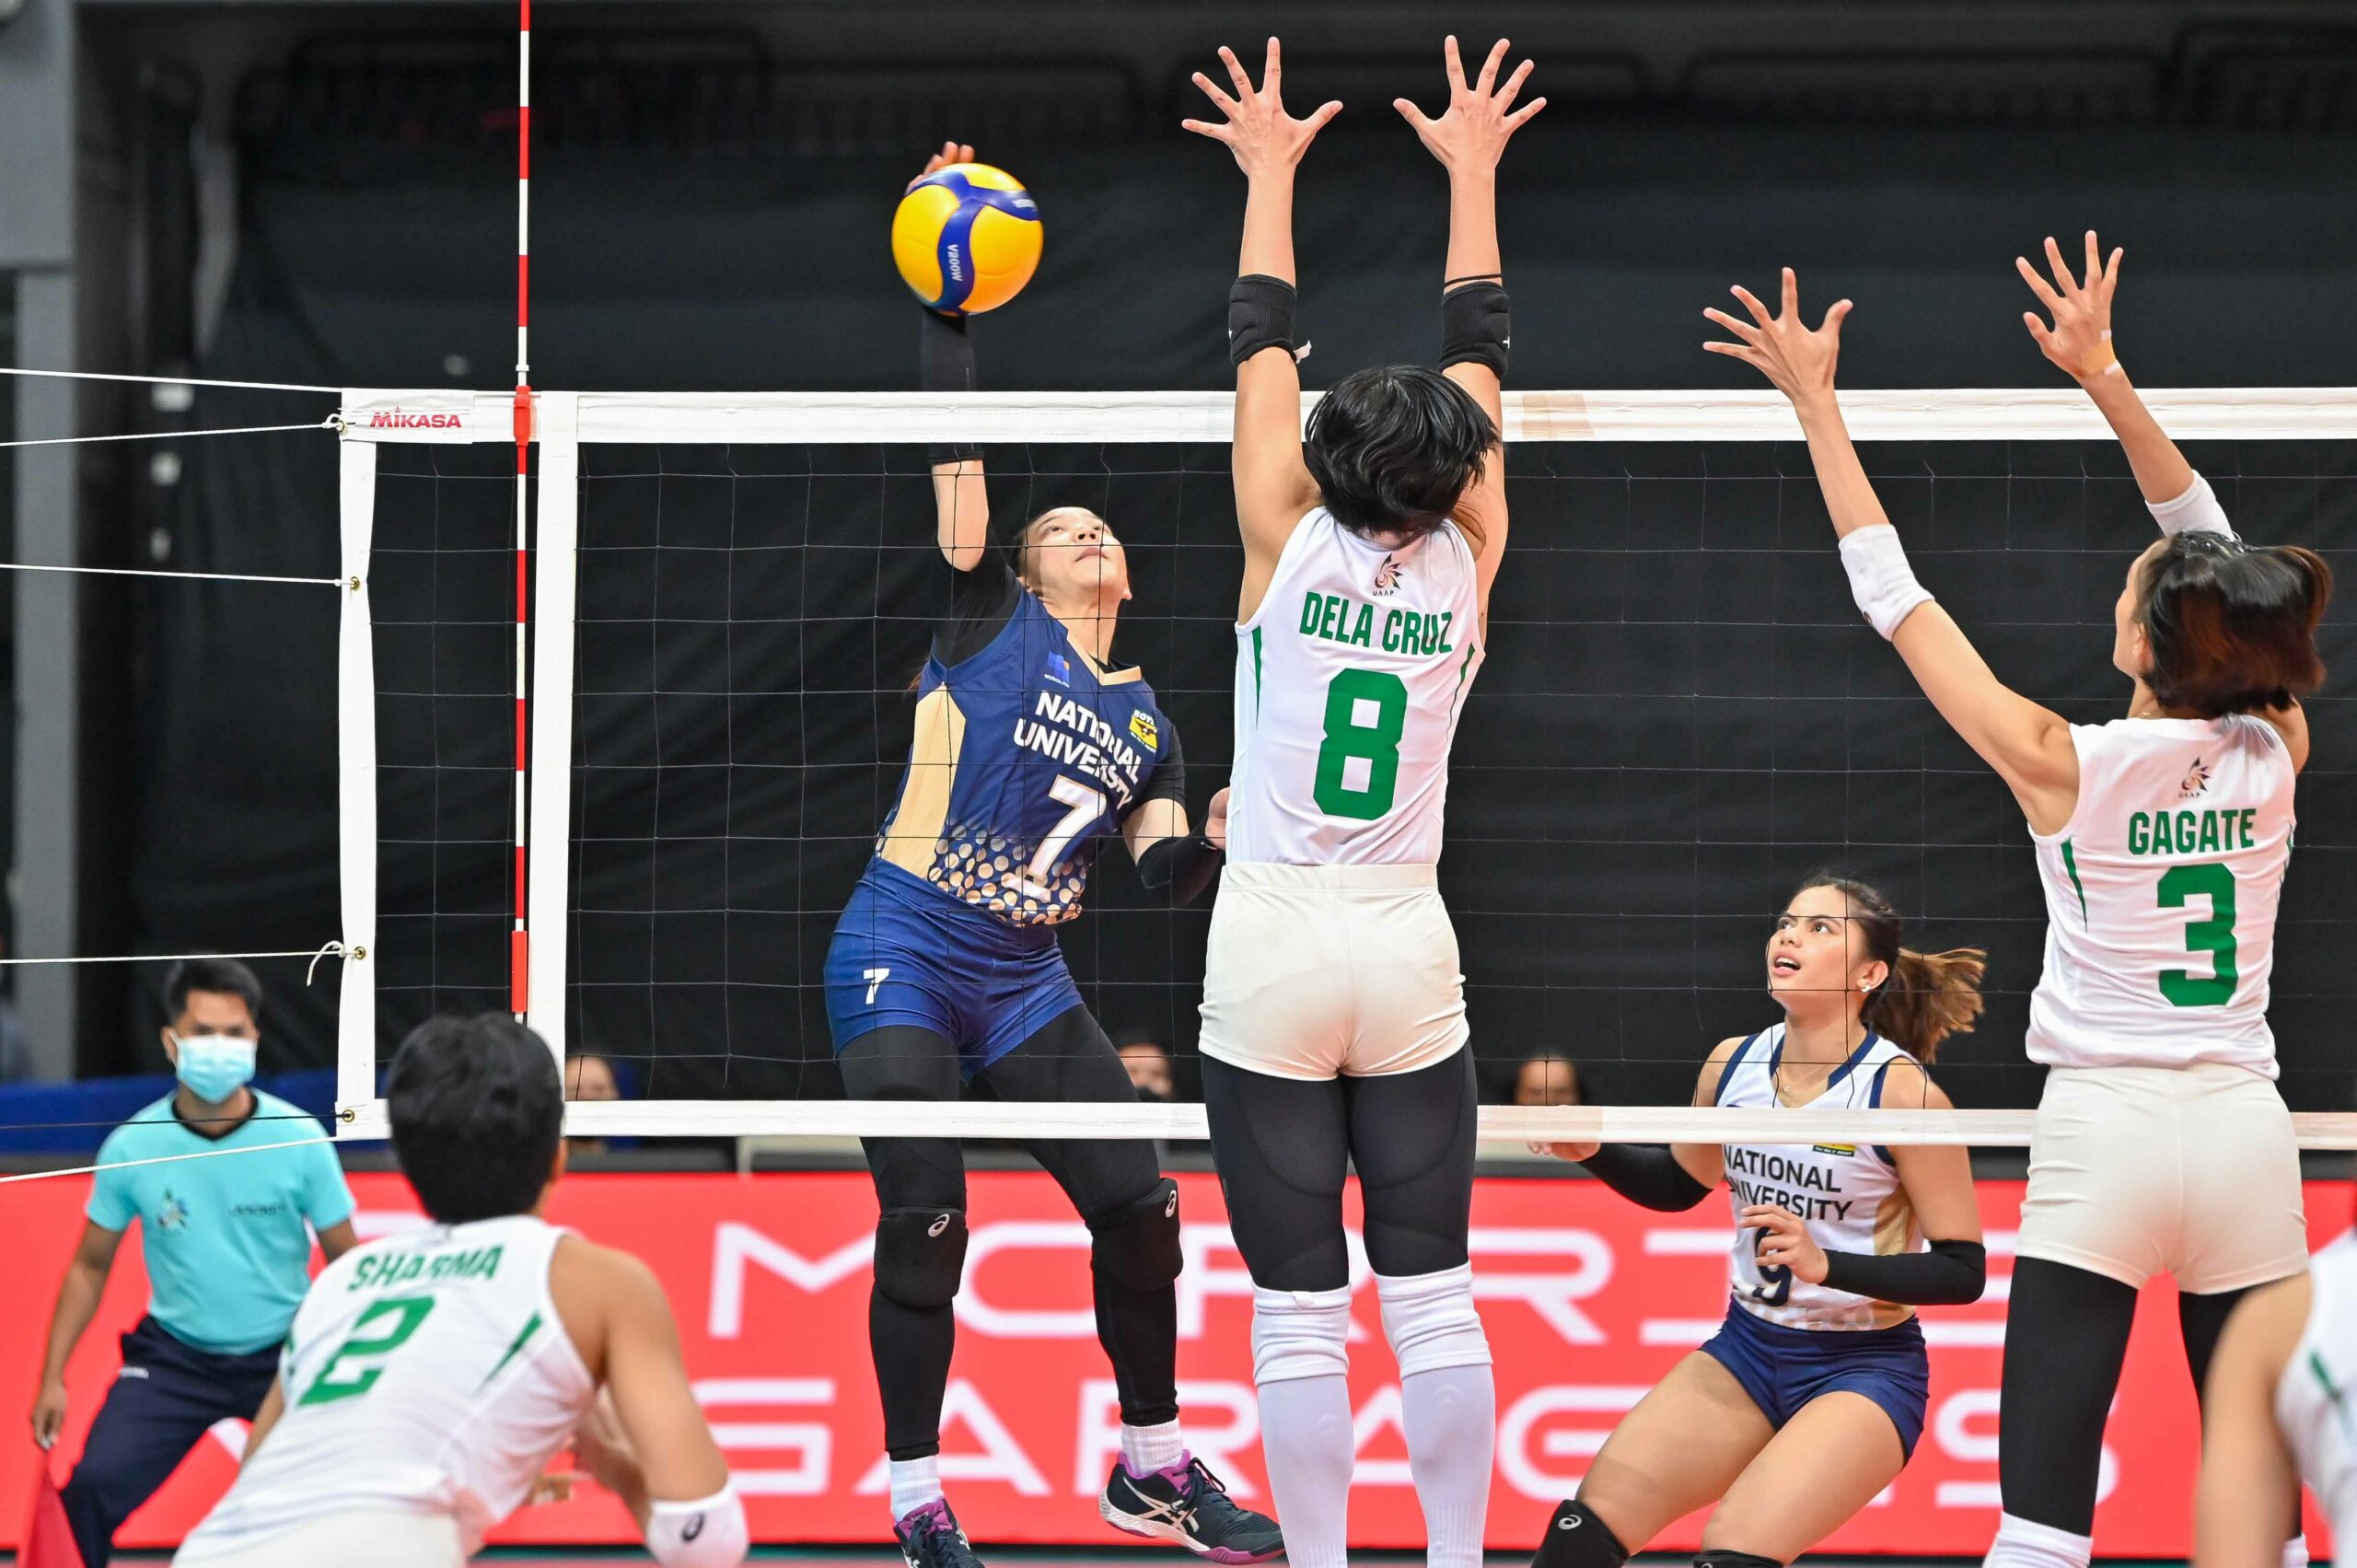 UAAP-Season-84-Womens-Volleyball-Finals-Game-2-Princess-Robles-1-scaled Princess Robles does not go home empty-handed, takes UAAP 84 Finals MVP News NU UAAP Volleyball  - philippine sports news